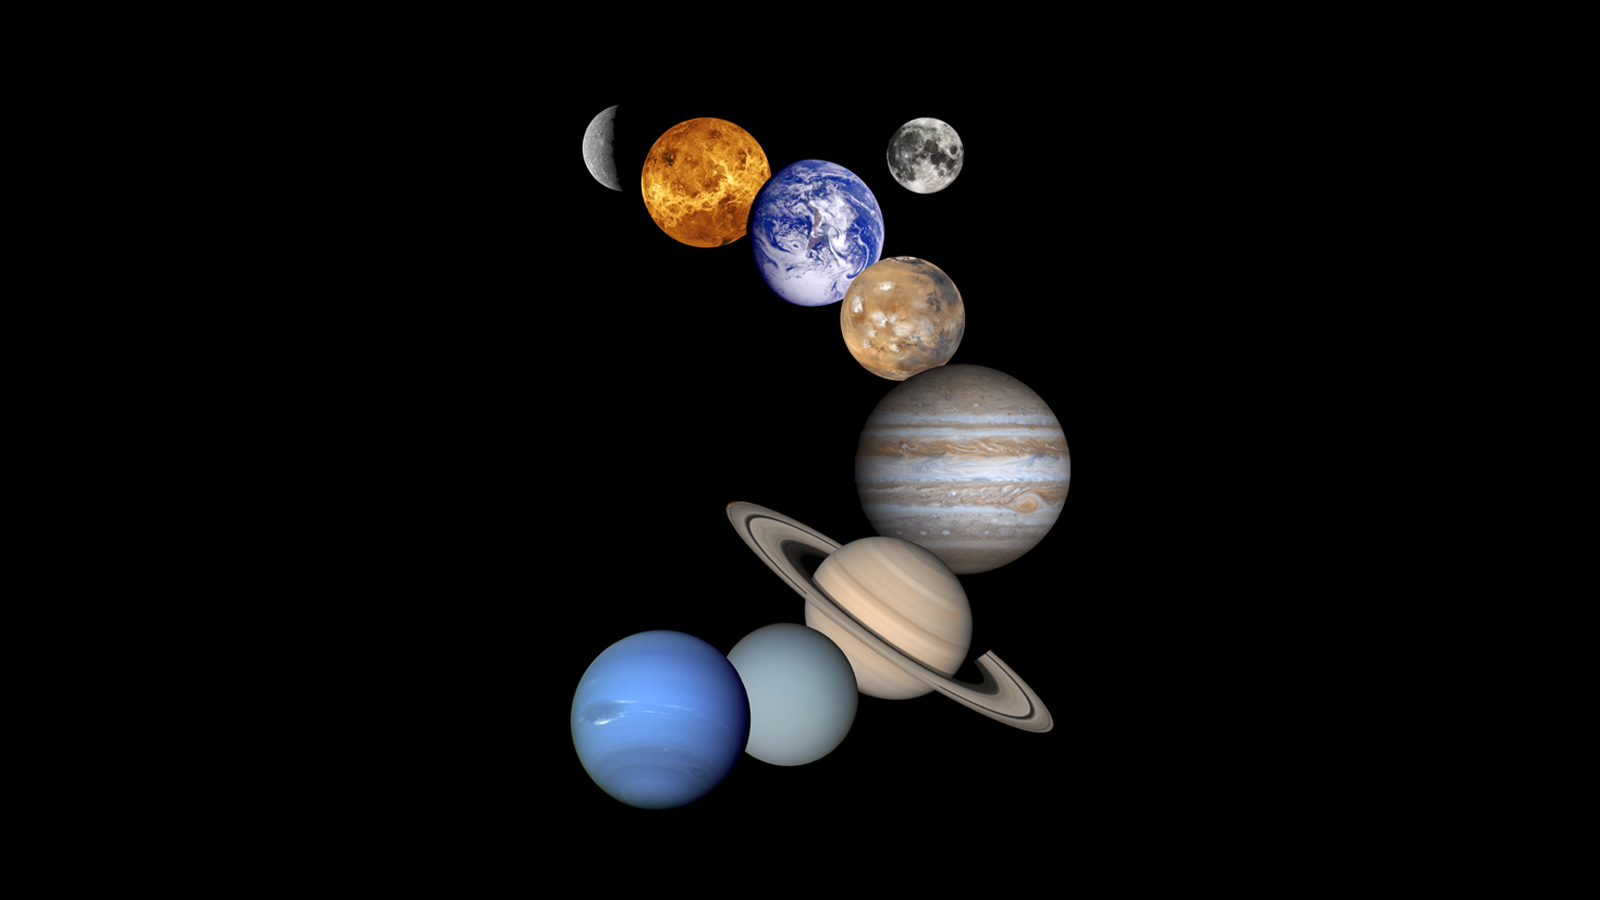 What Colors Are the Planets